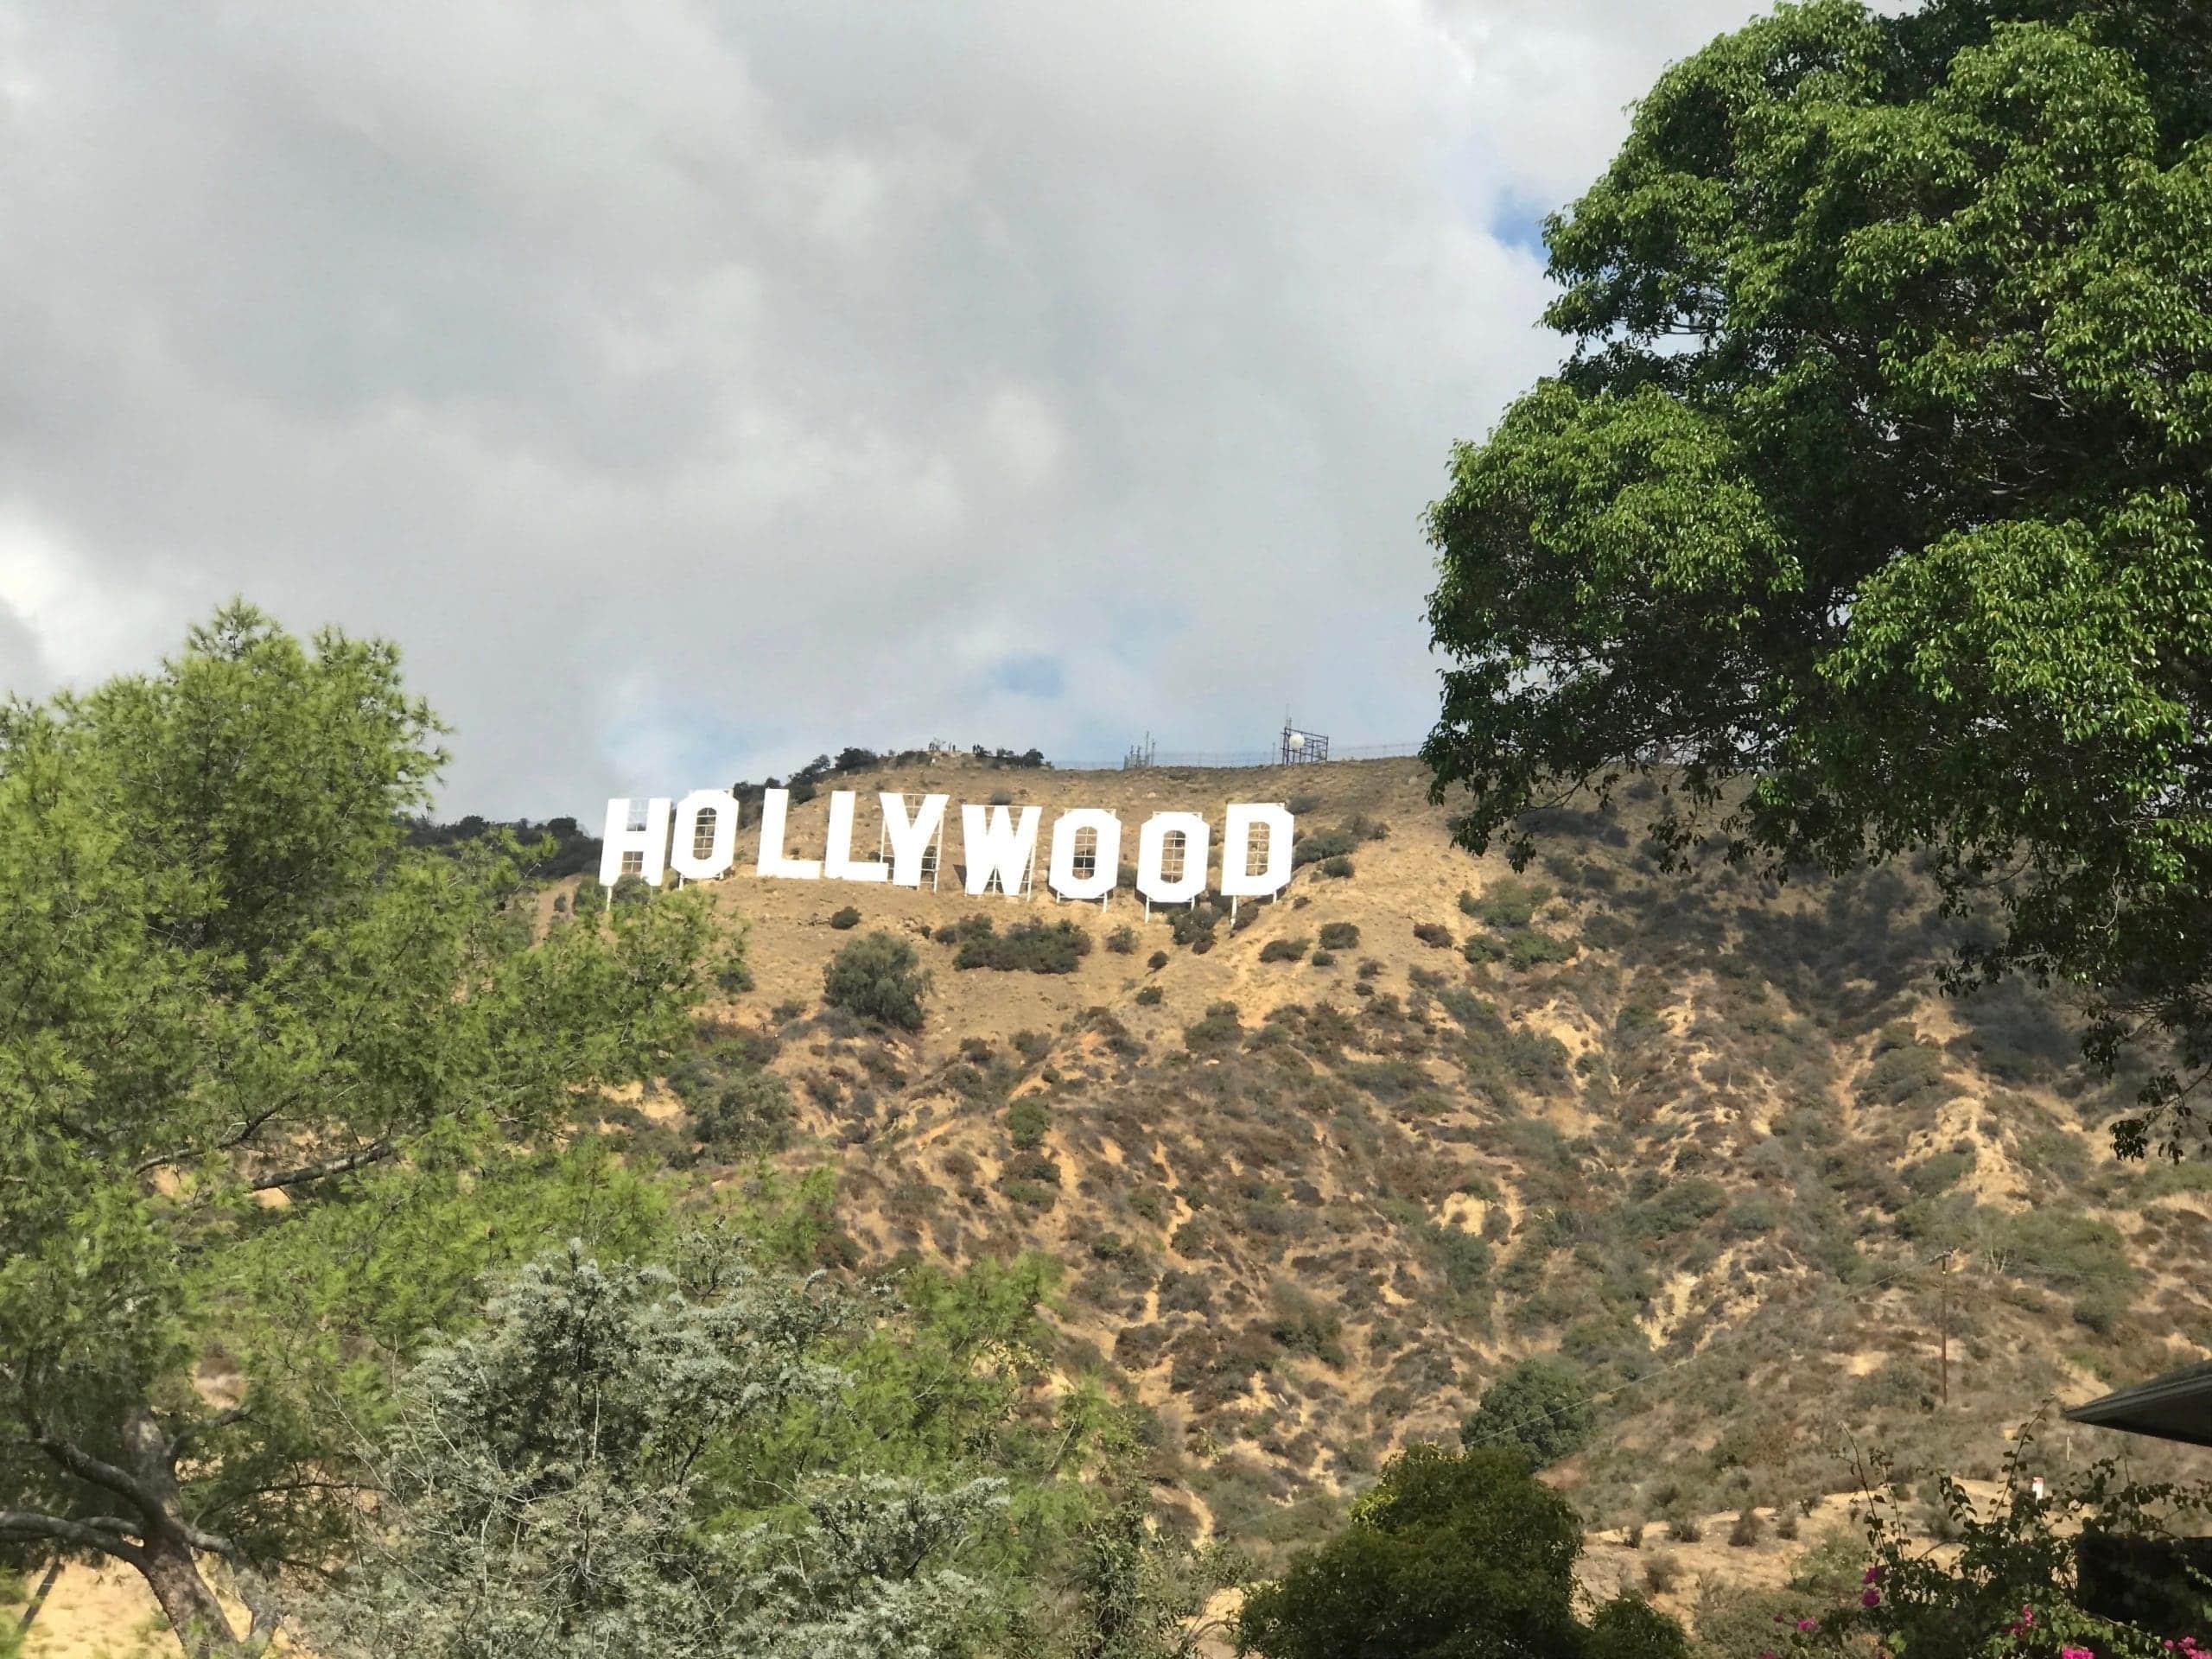 What are some of the most noteworthy celeb homes on the Hollywood tour?